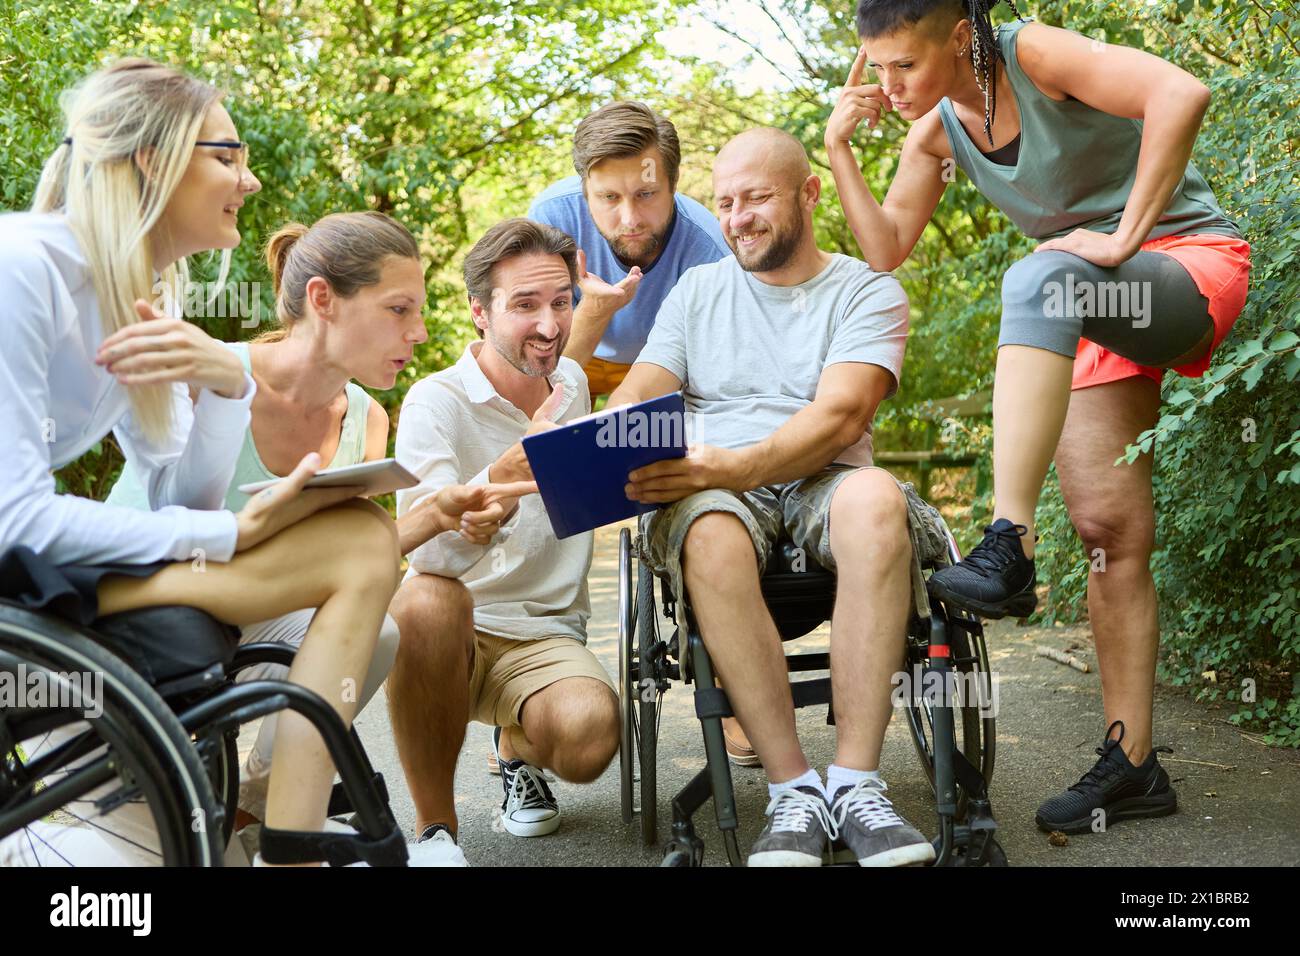 A diverse group of friends enjoys time outdoors, including a person using a wheelchair and another with a prosthetic leg, embodying inclusion and posi Stock Photo